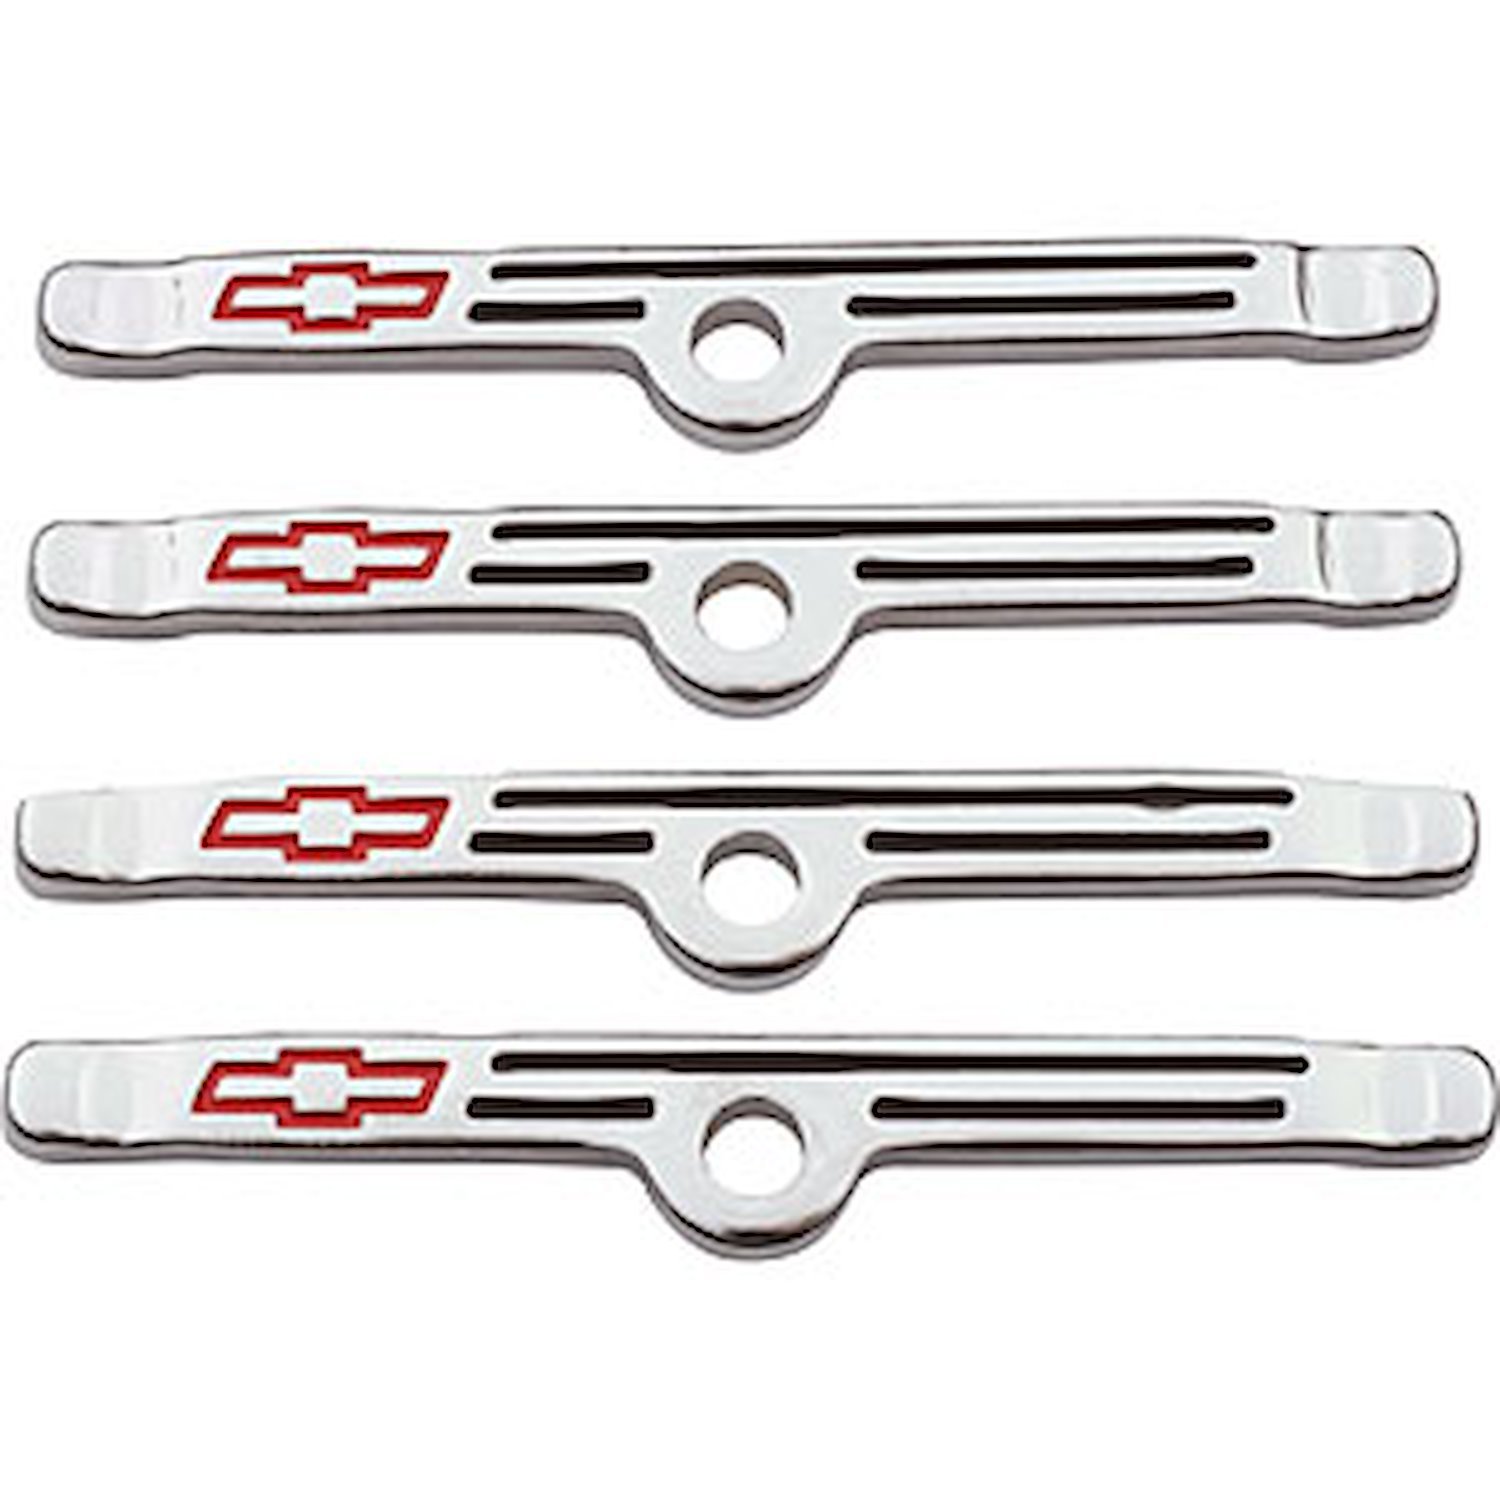 Bowtie Valve Cover Hold-Down Clamps for 1958-1986 Small Block Chevy & V6/90° in Chrome Finish with Red Bowtie Emblem